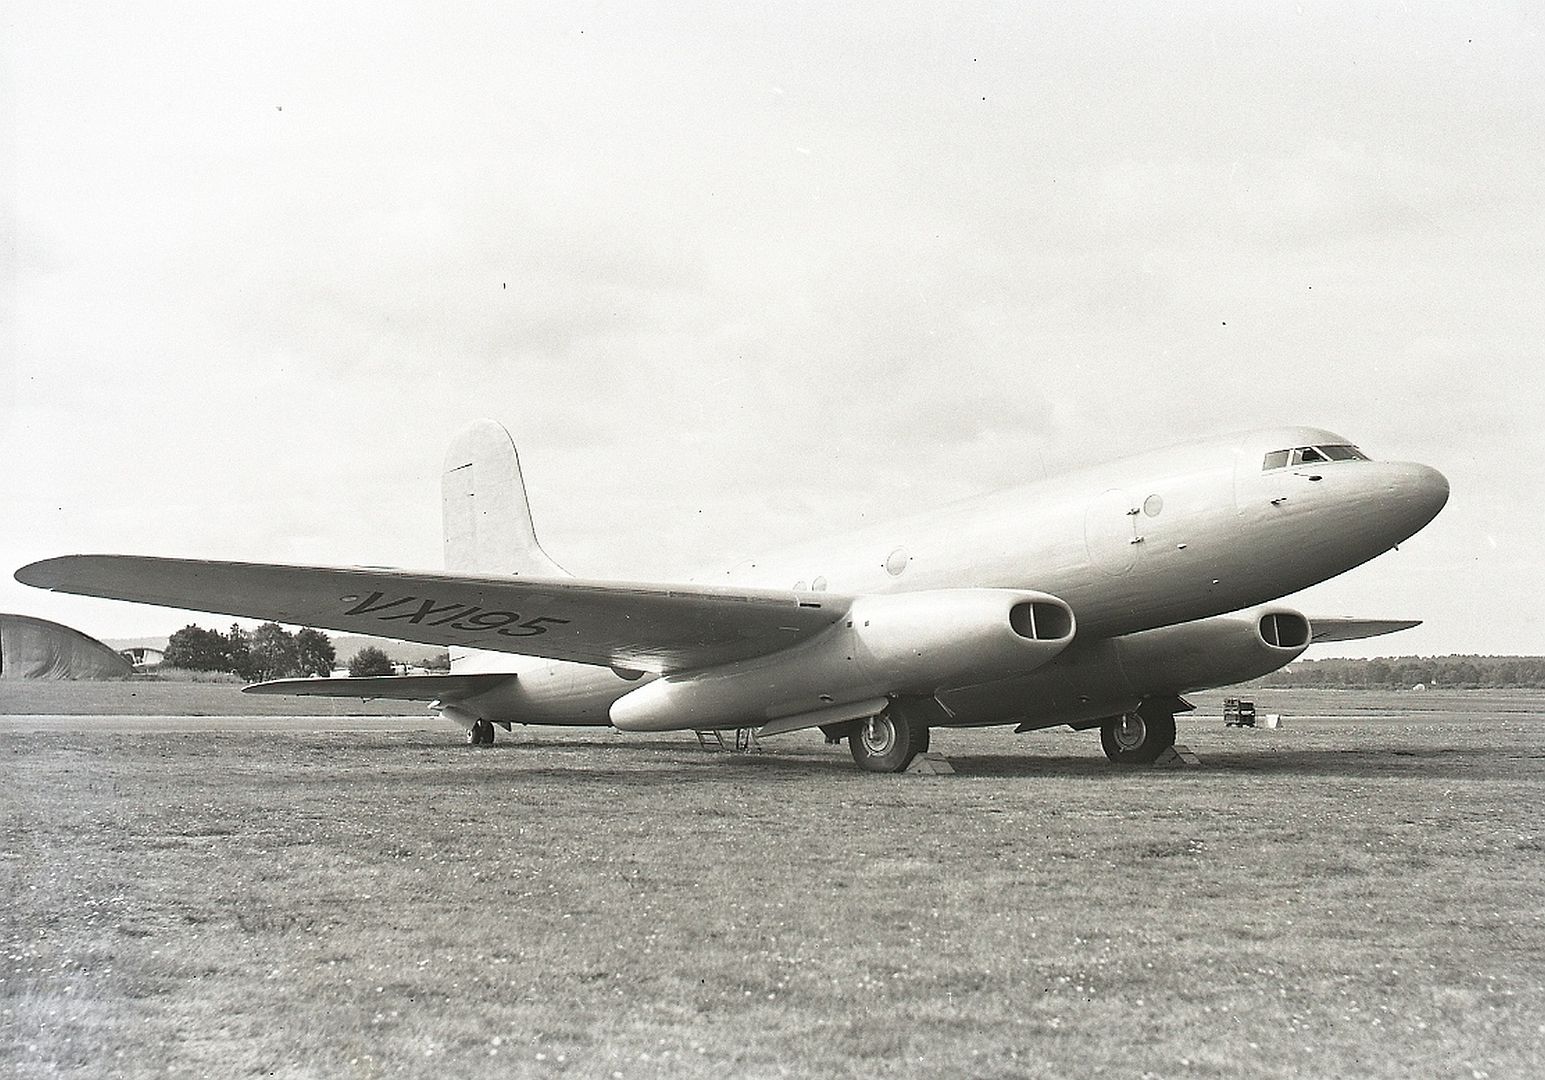 Avro 688 Tudor Used A A Testbed For The Rolls Royce Nene Engine